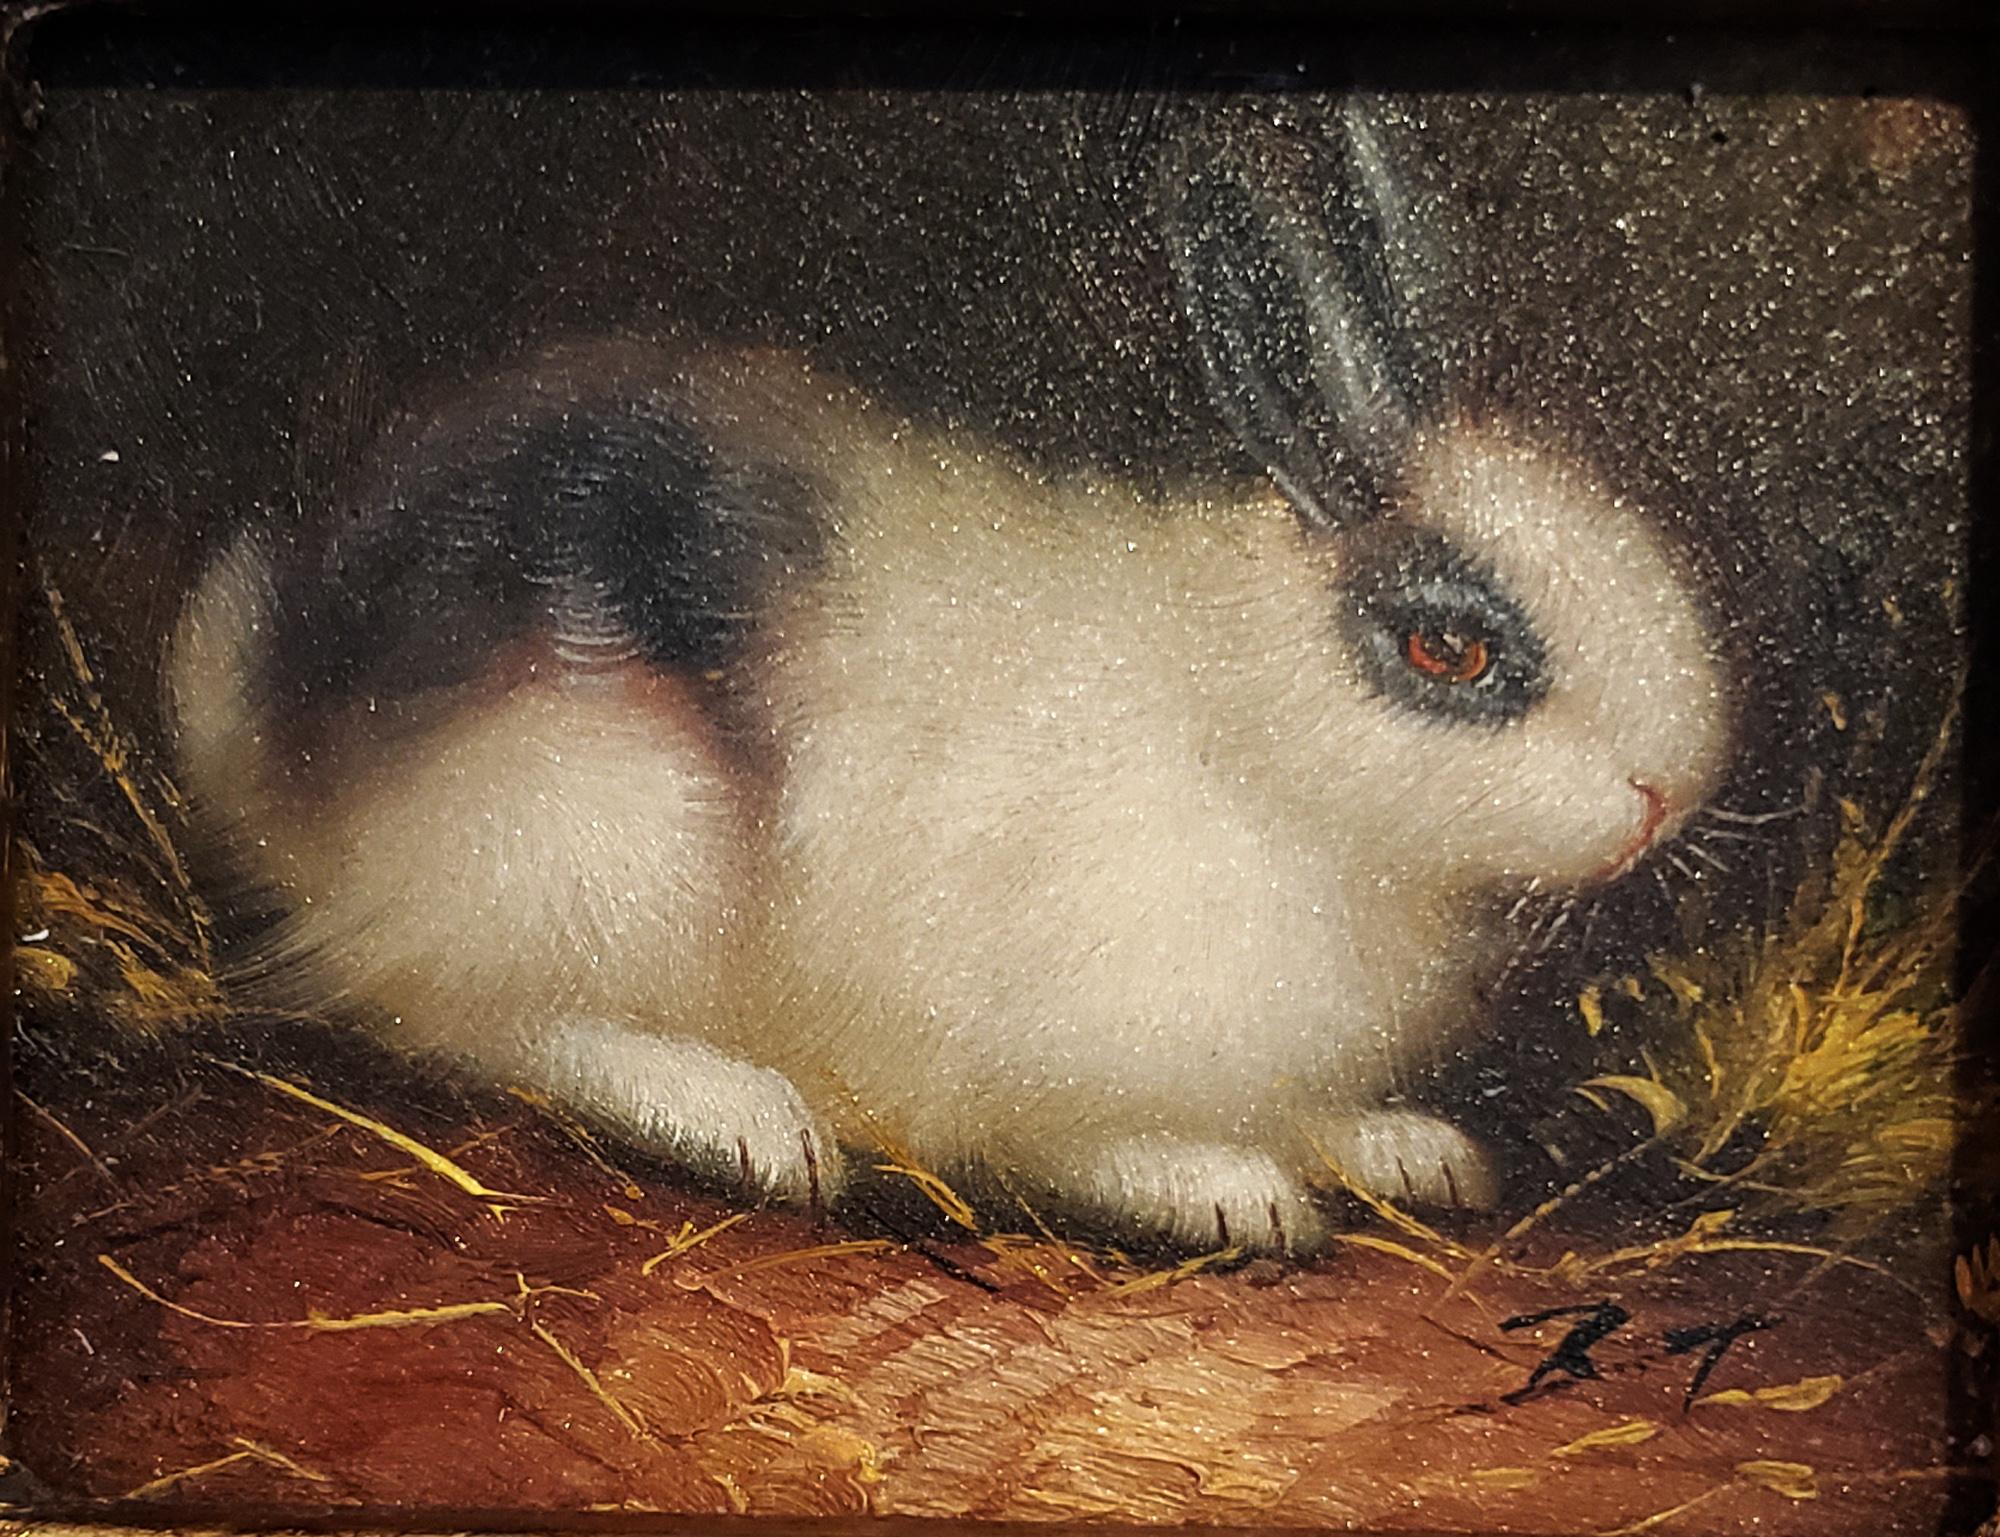 Paintings of Rabbits, 
A Pair,
Signed LR BT,
Oil on board,
Early 20th century

The charming pair of miniature paintings each depict a different rabbit. On the right is a white rabbit with a carrot at its front paws. The left rabbit depicts a